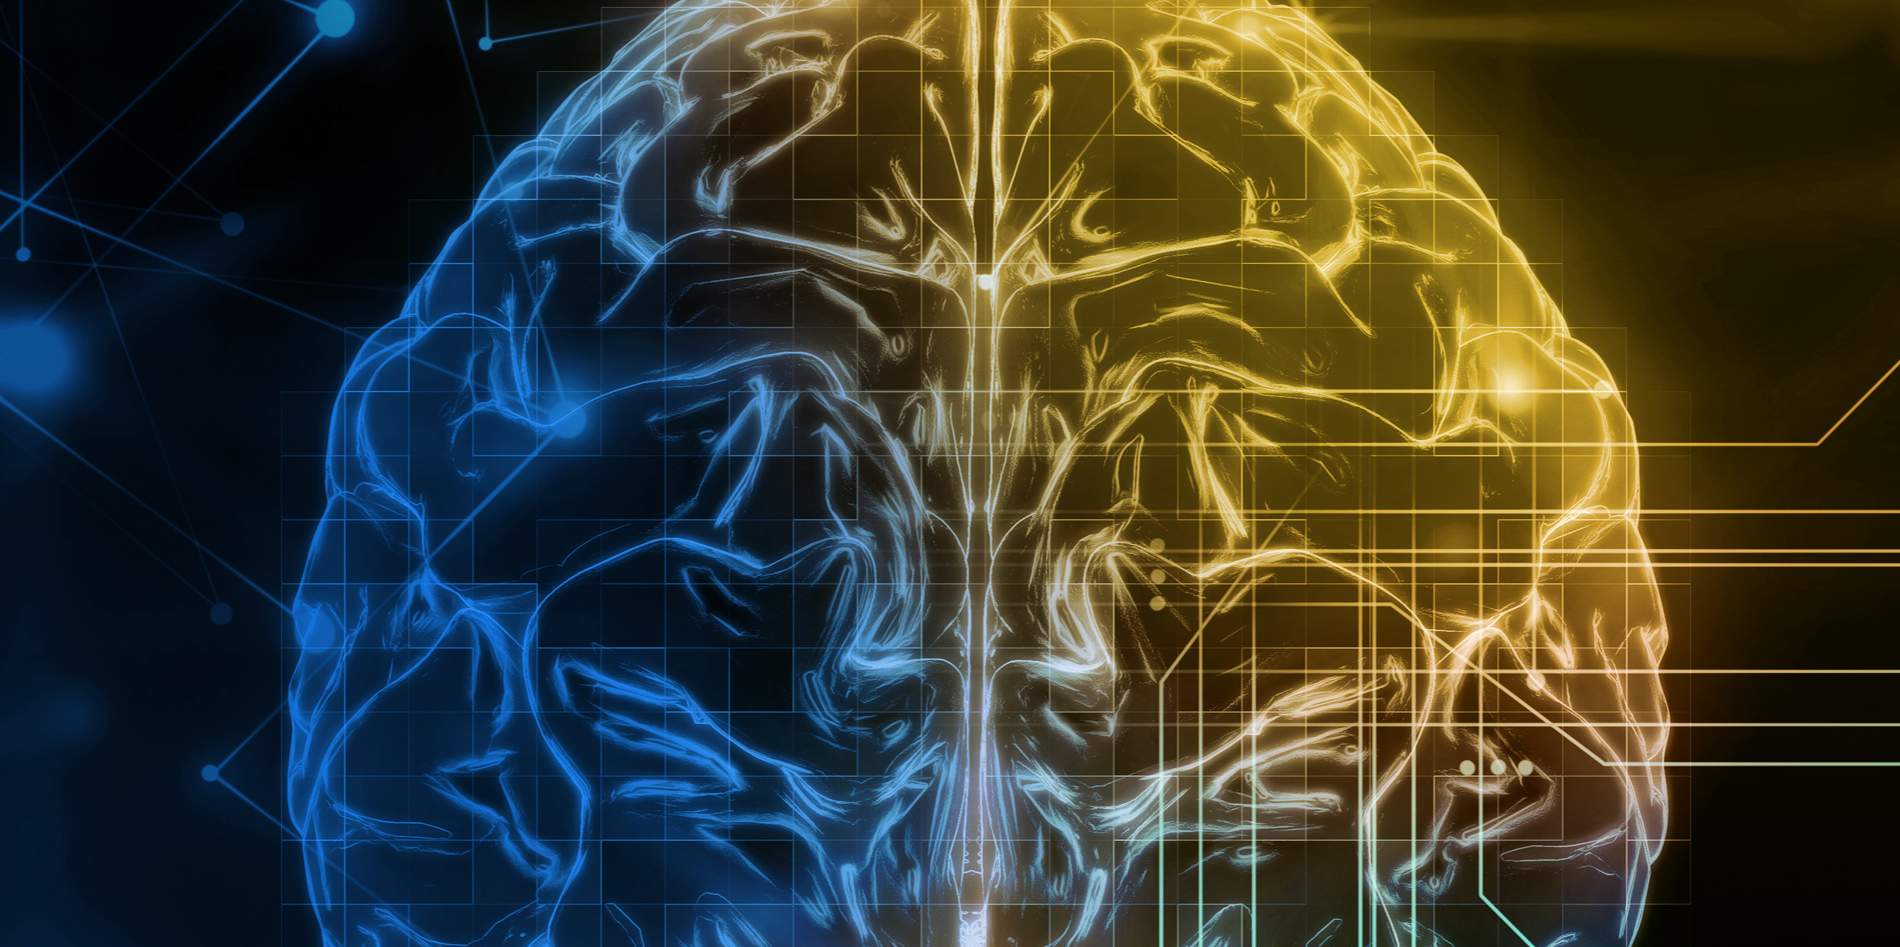 Image of an abstract brain concept